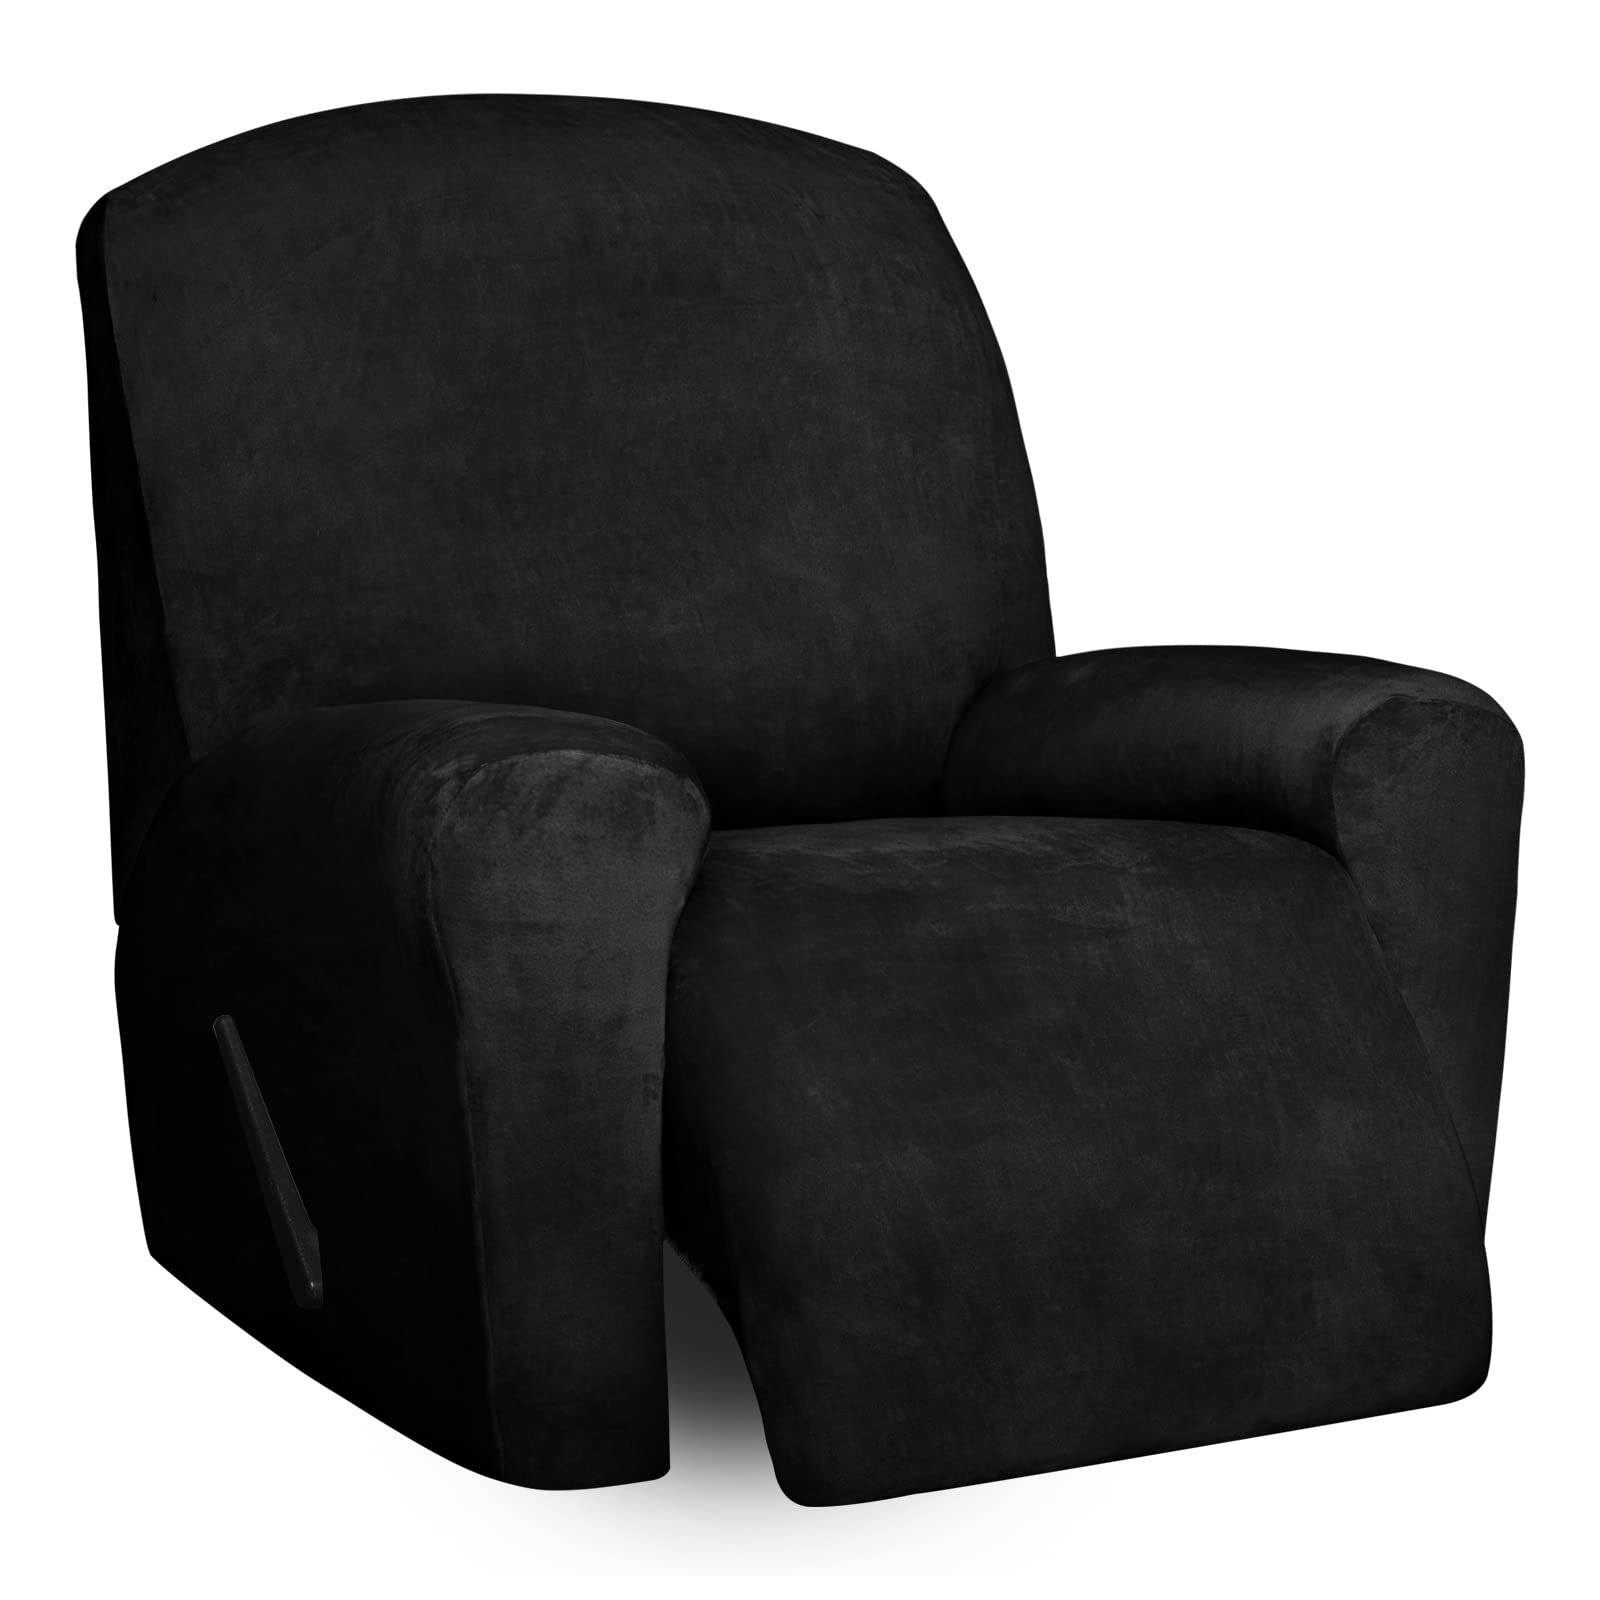 Easy-Going Recliner Chair Cover Velvet 4 -Pieces Recliner Covers Soft Thick Velvet Reclining Chair Slipcovers with Elastic Botto